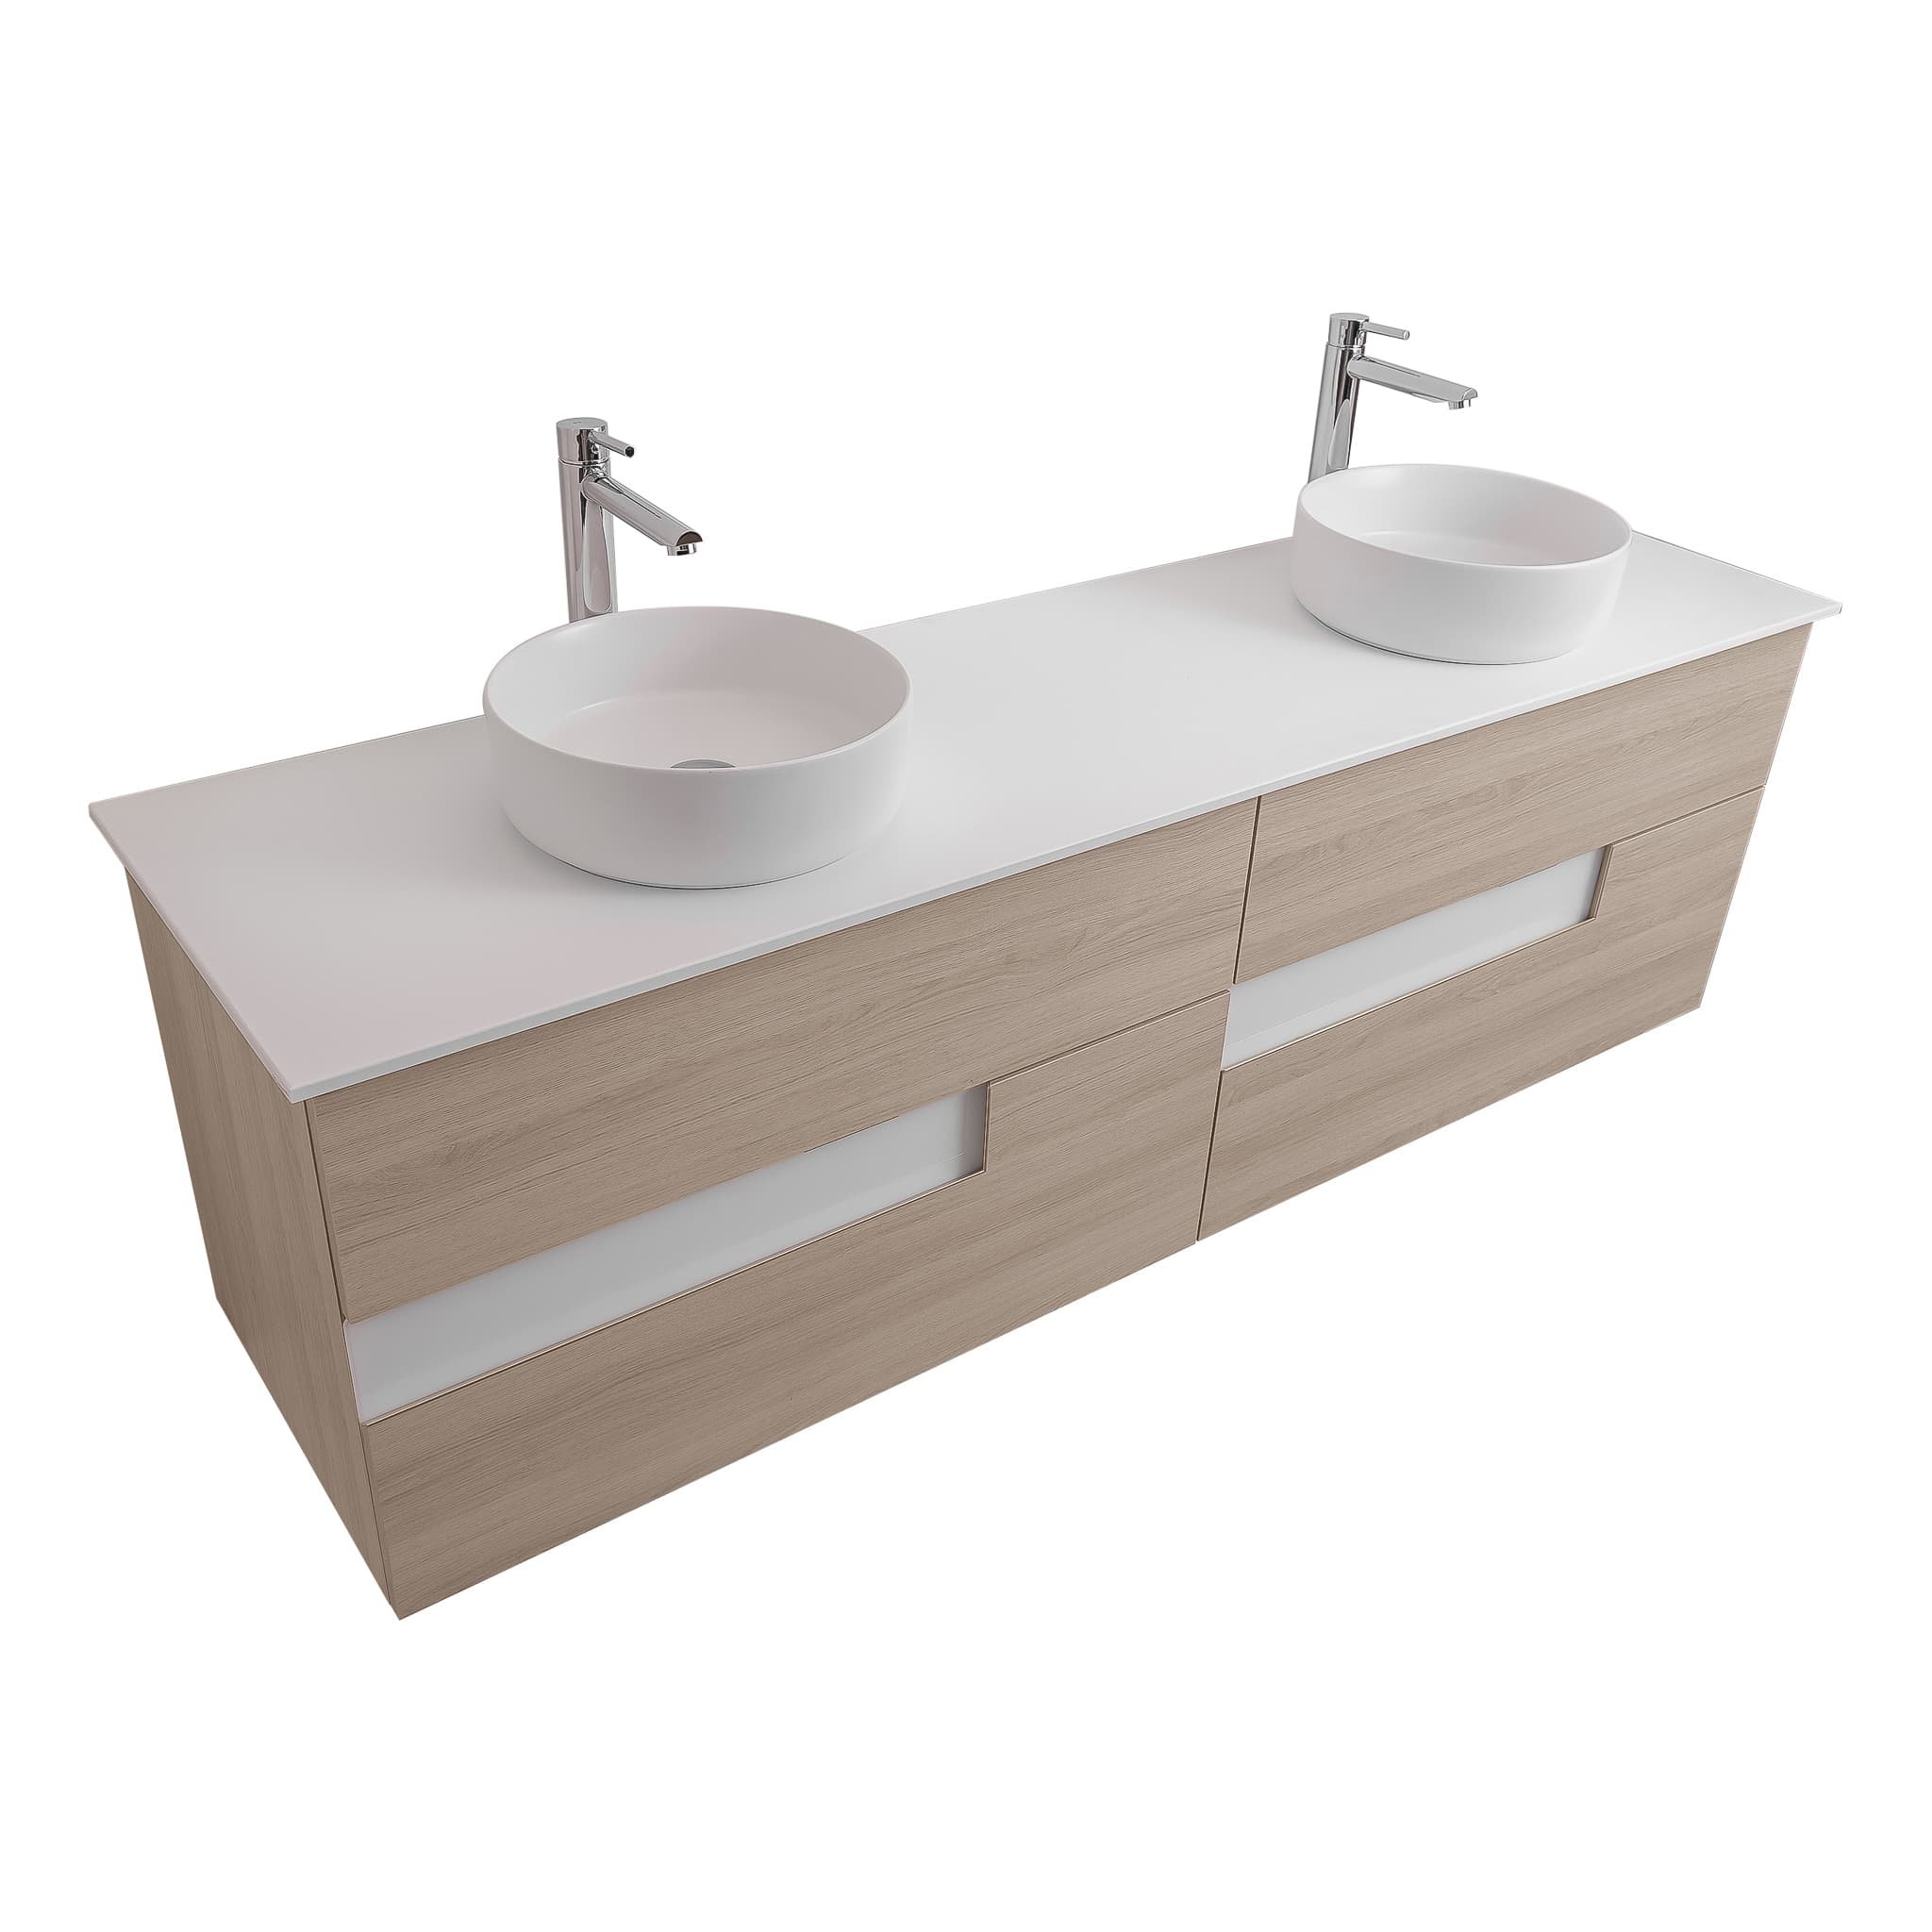 Vision 63 Natural Light Wood Cabinet, Ares White Top And Two Ares White Ceramic Basin, Wall Mounted Modern Vanity Set